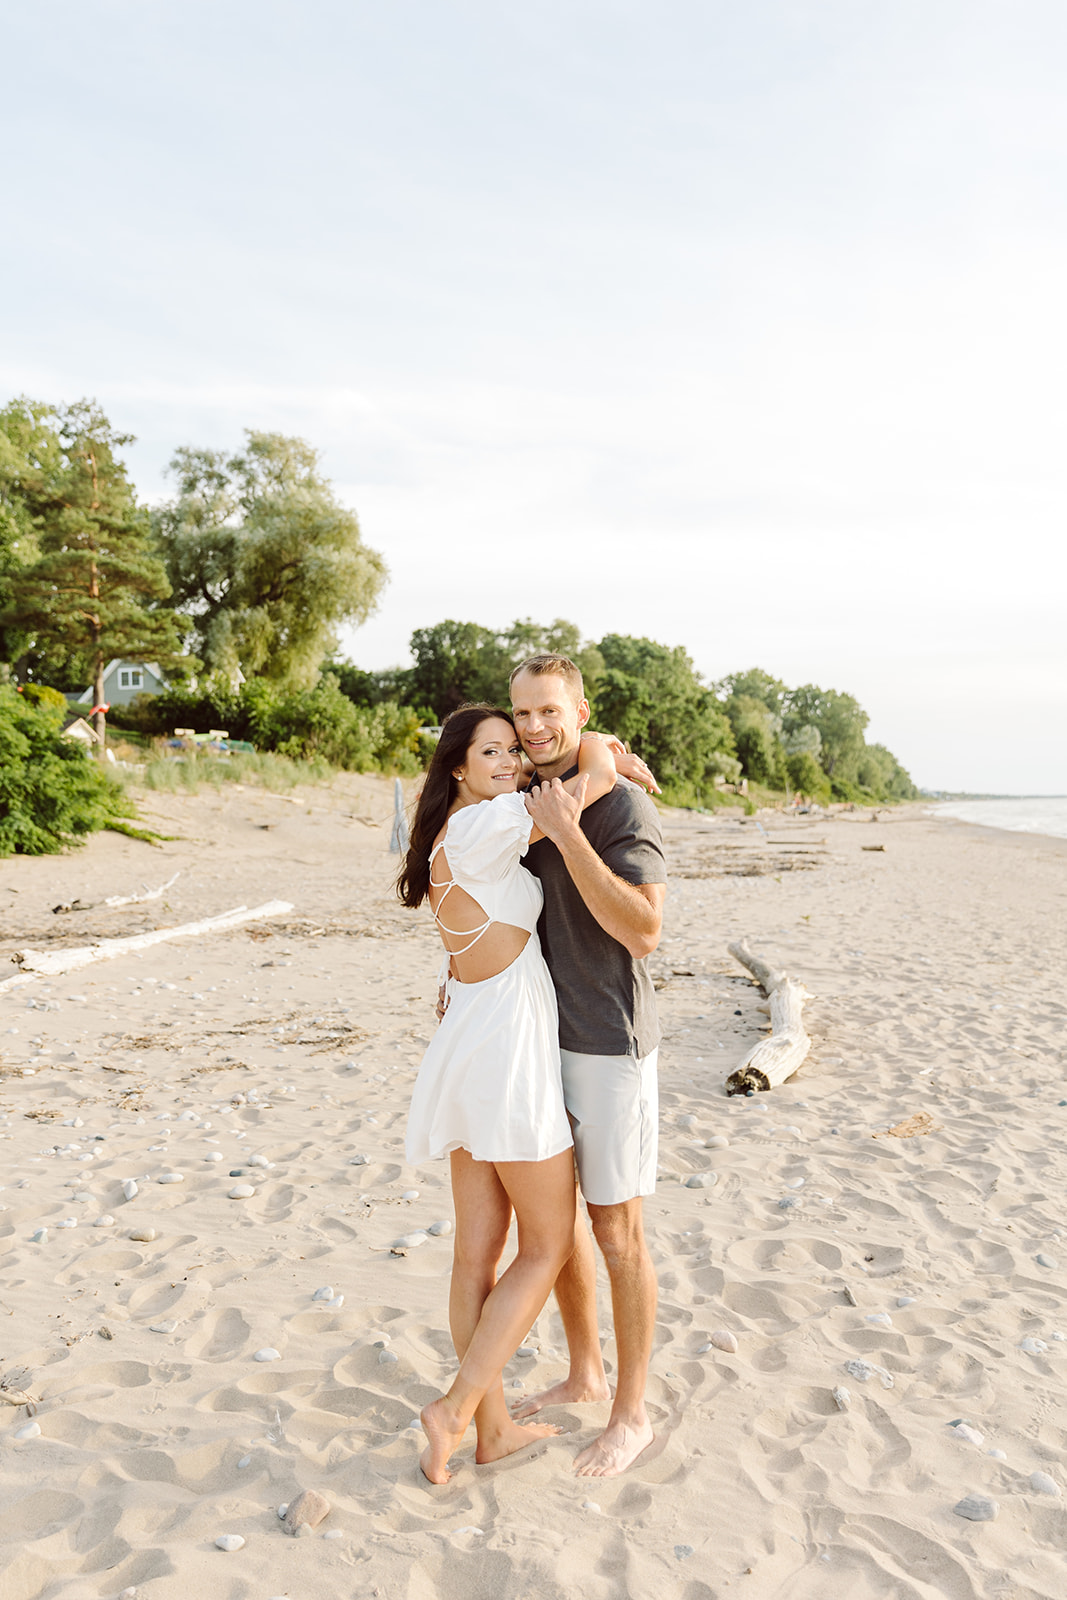 Grand Bend Beach Engagement Photography